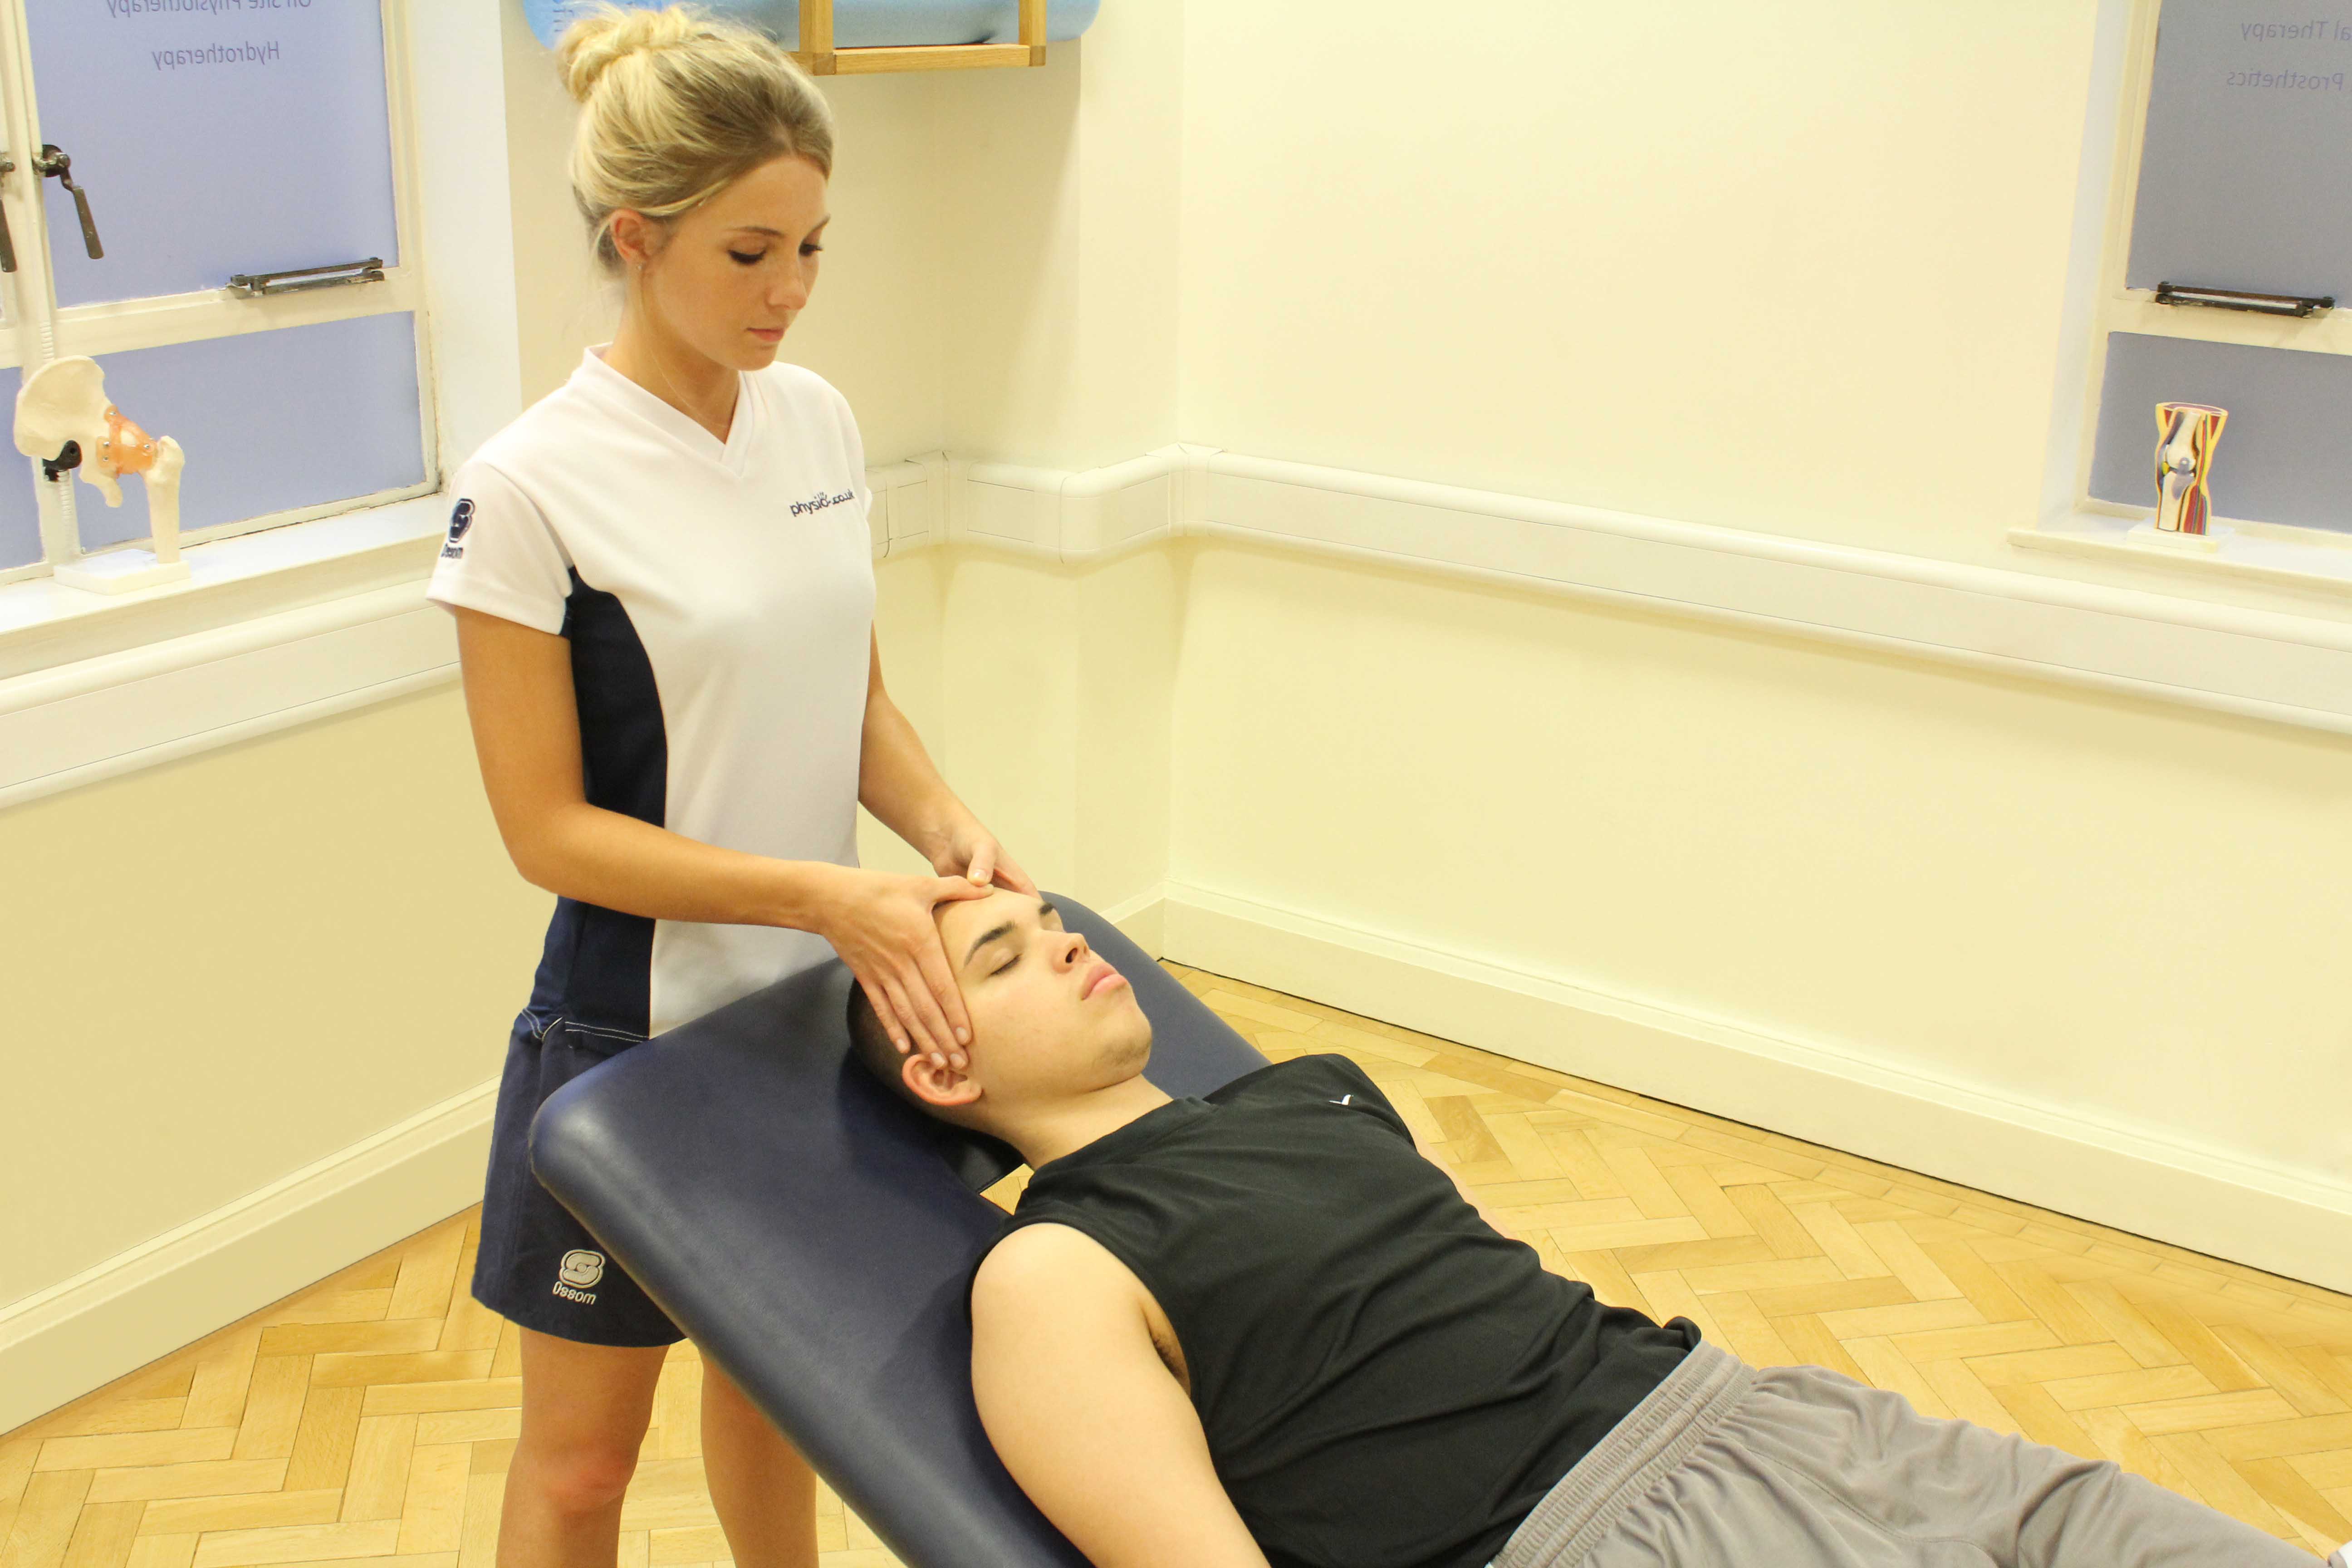 Head and neck massage to relieve stress, tension and anxiety. Performed by a specialist massage thersapist